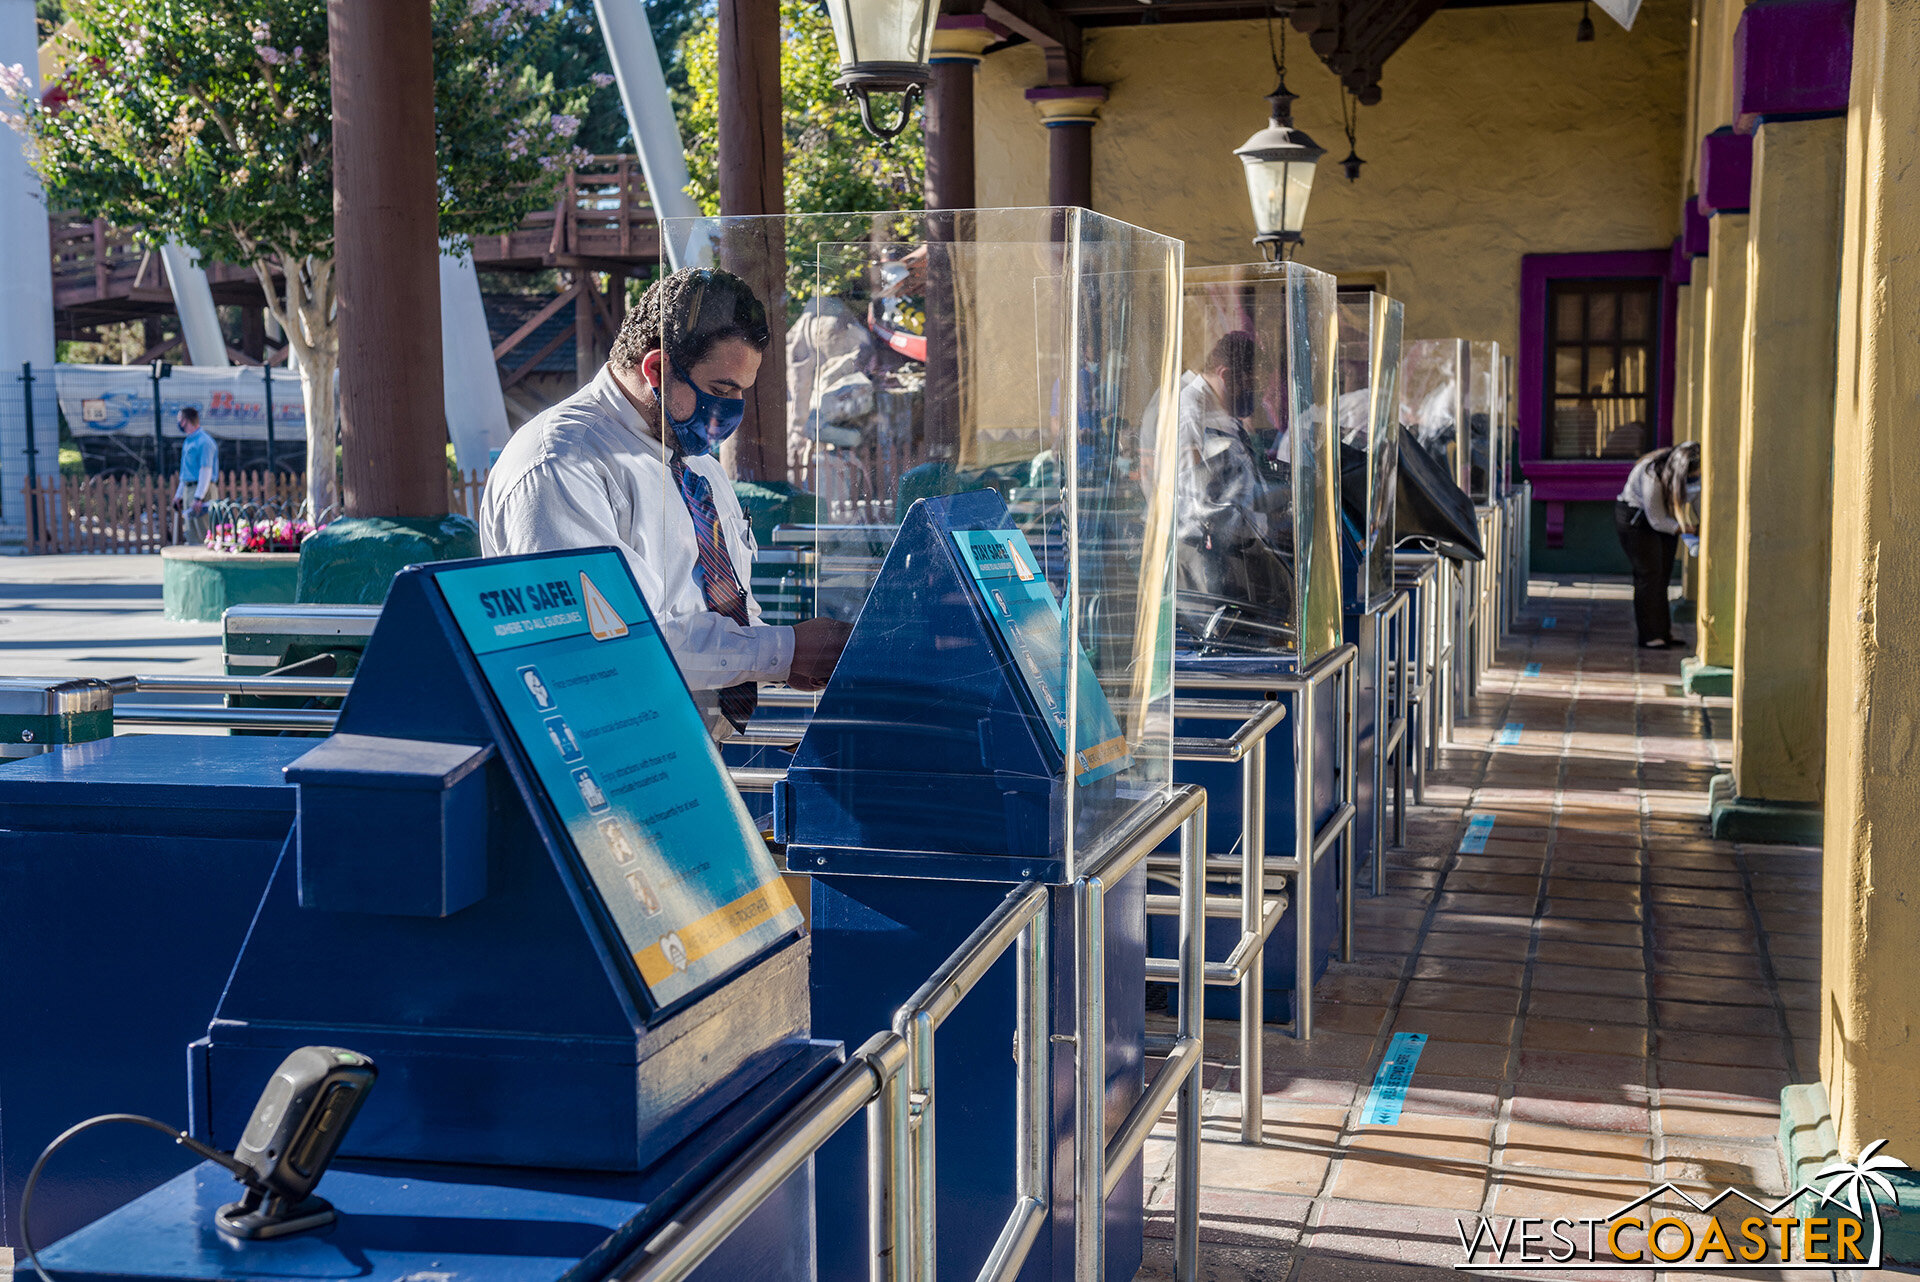  Plexiglass barriers have been installed to keep gate attendants better protected from the multitude of guests they’ll have to engage.  Guests’ reservation ticket barcodes are scanned through the glass, and the attendants set the Tasting Card and lan